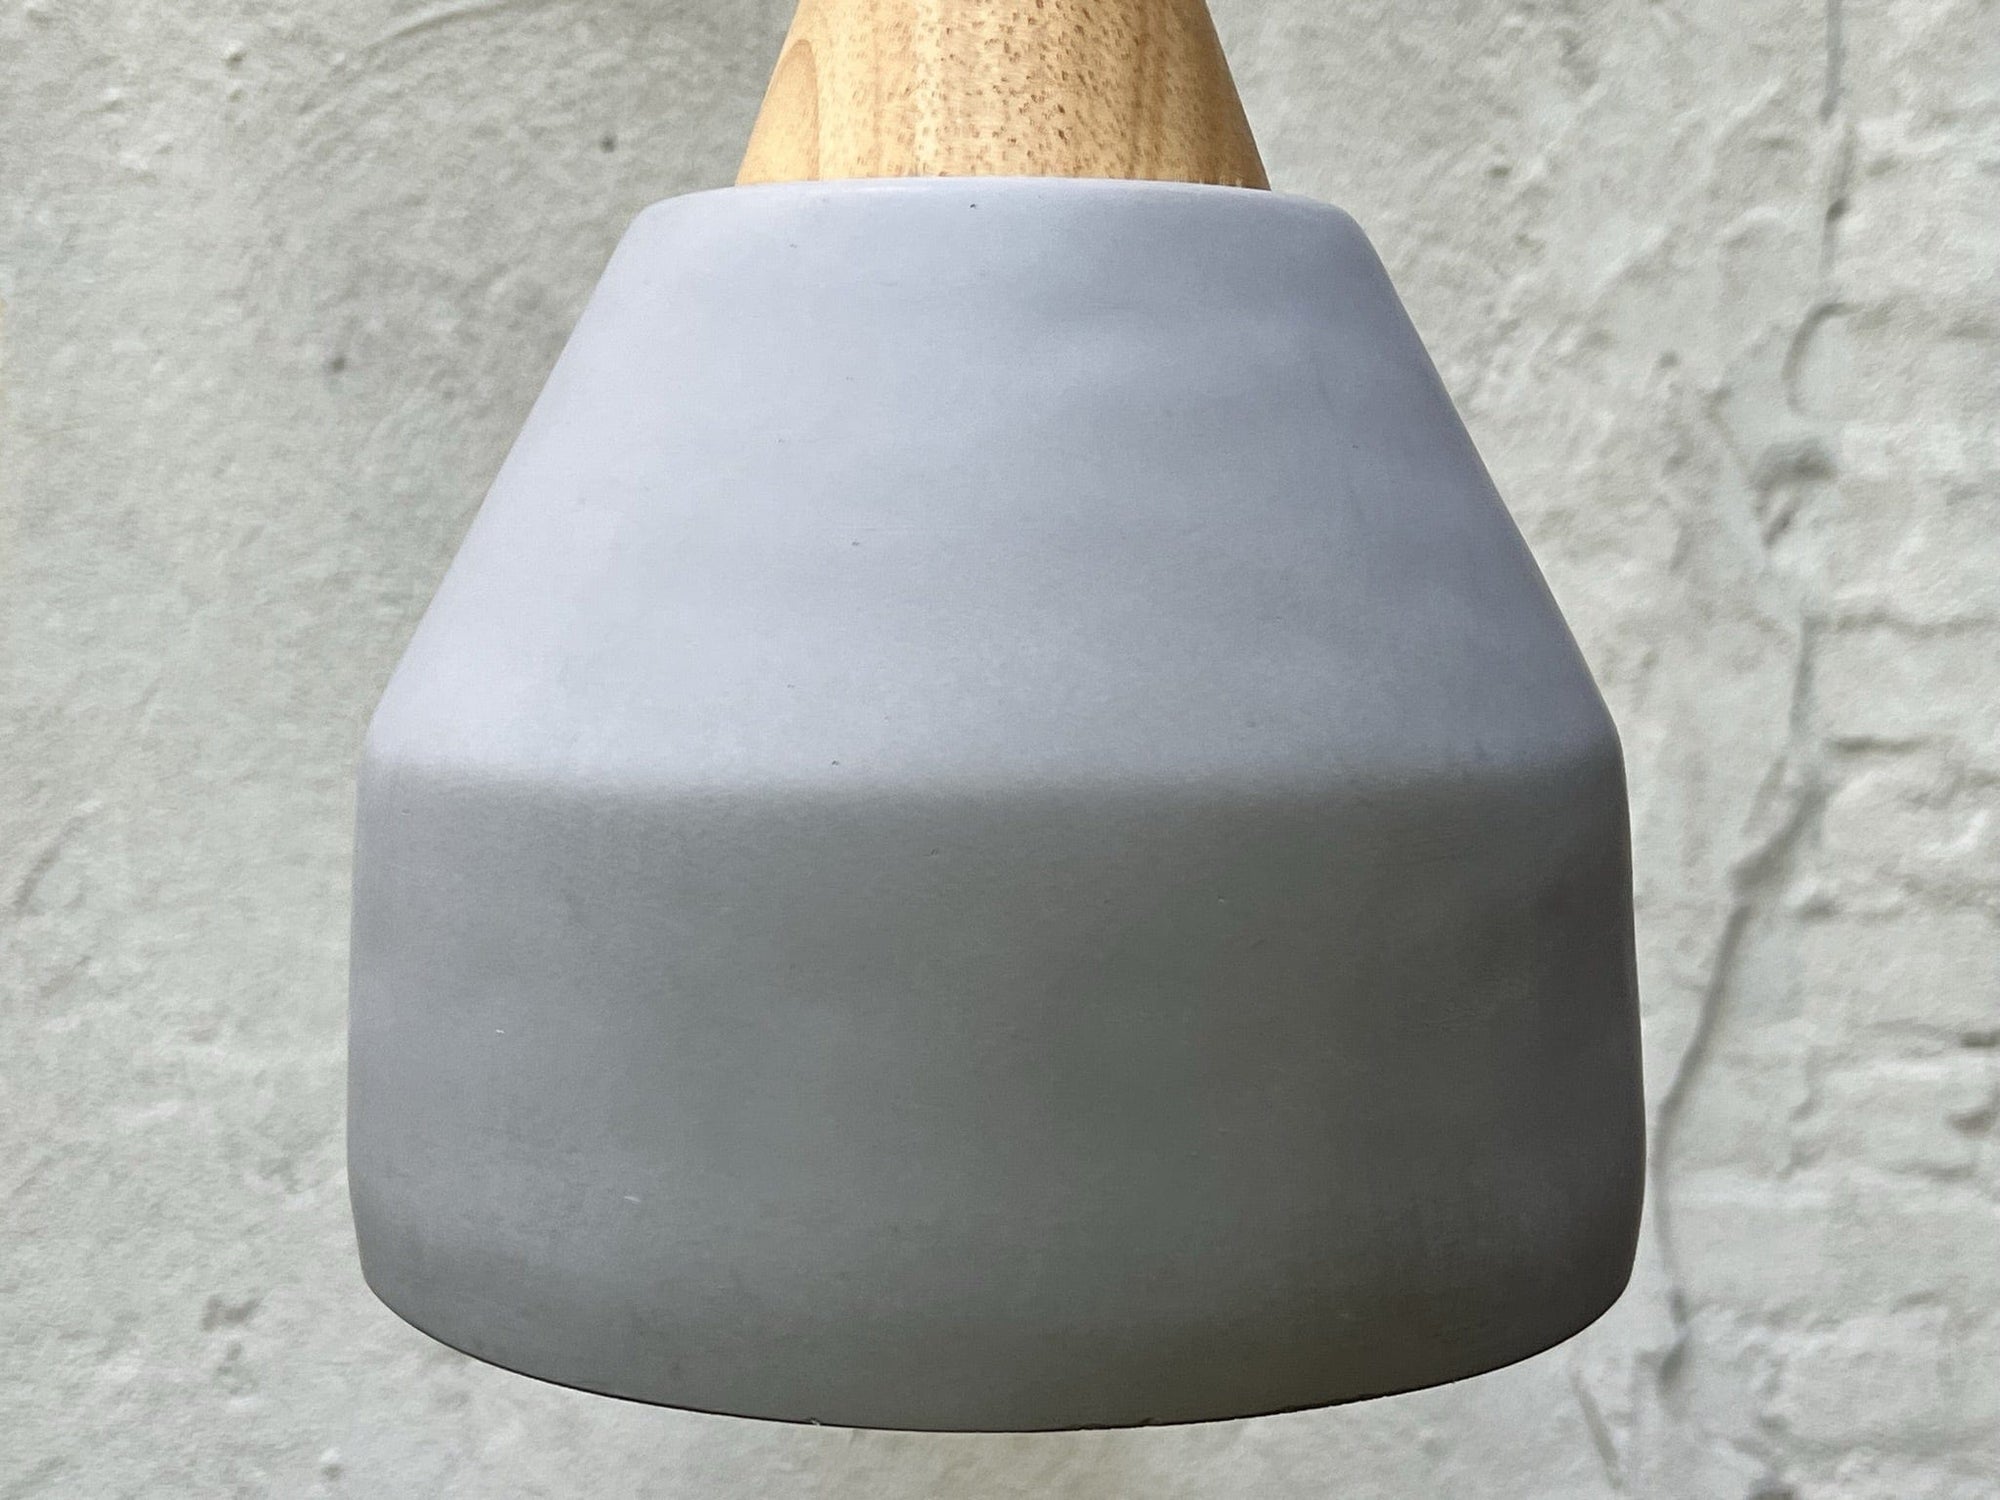 I Like Mike's Mid Century Modern pendant light Domed Concrete and Wood Hanging or Fixture Pendant Lamp - Two Available (New Unused)